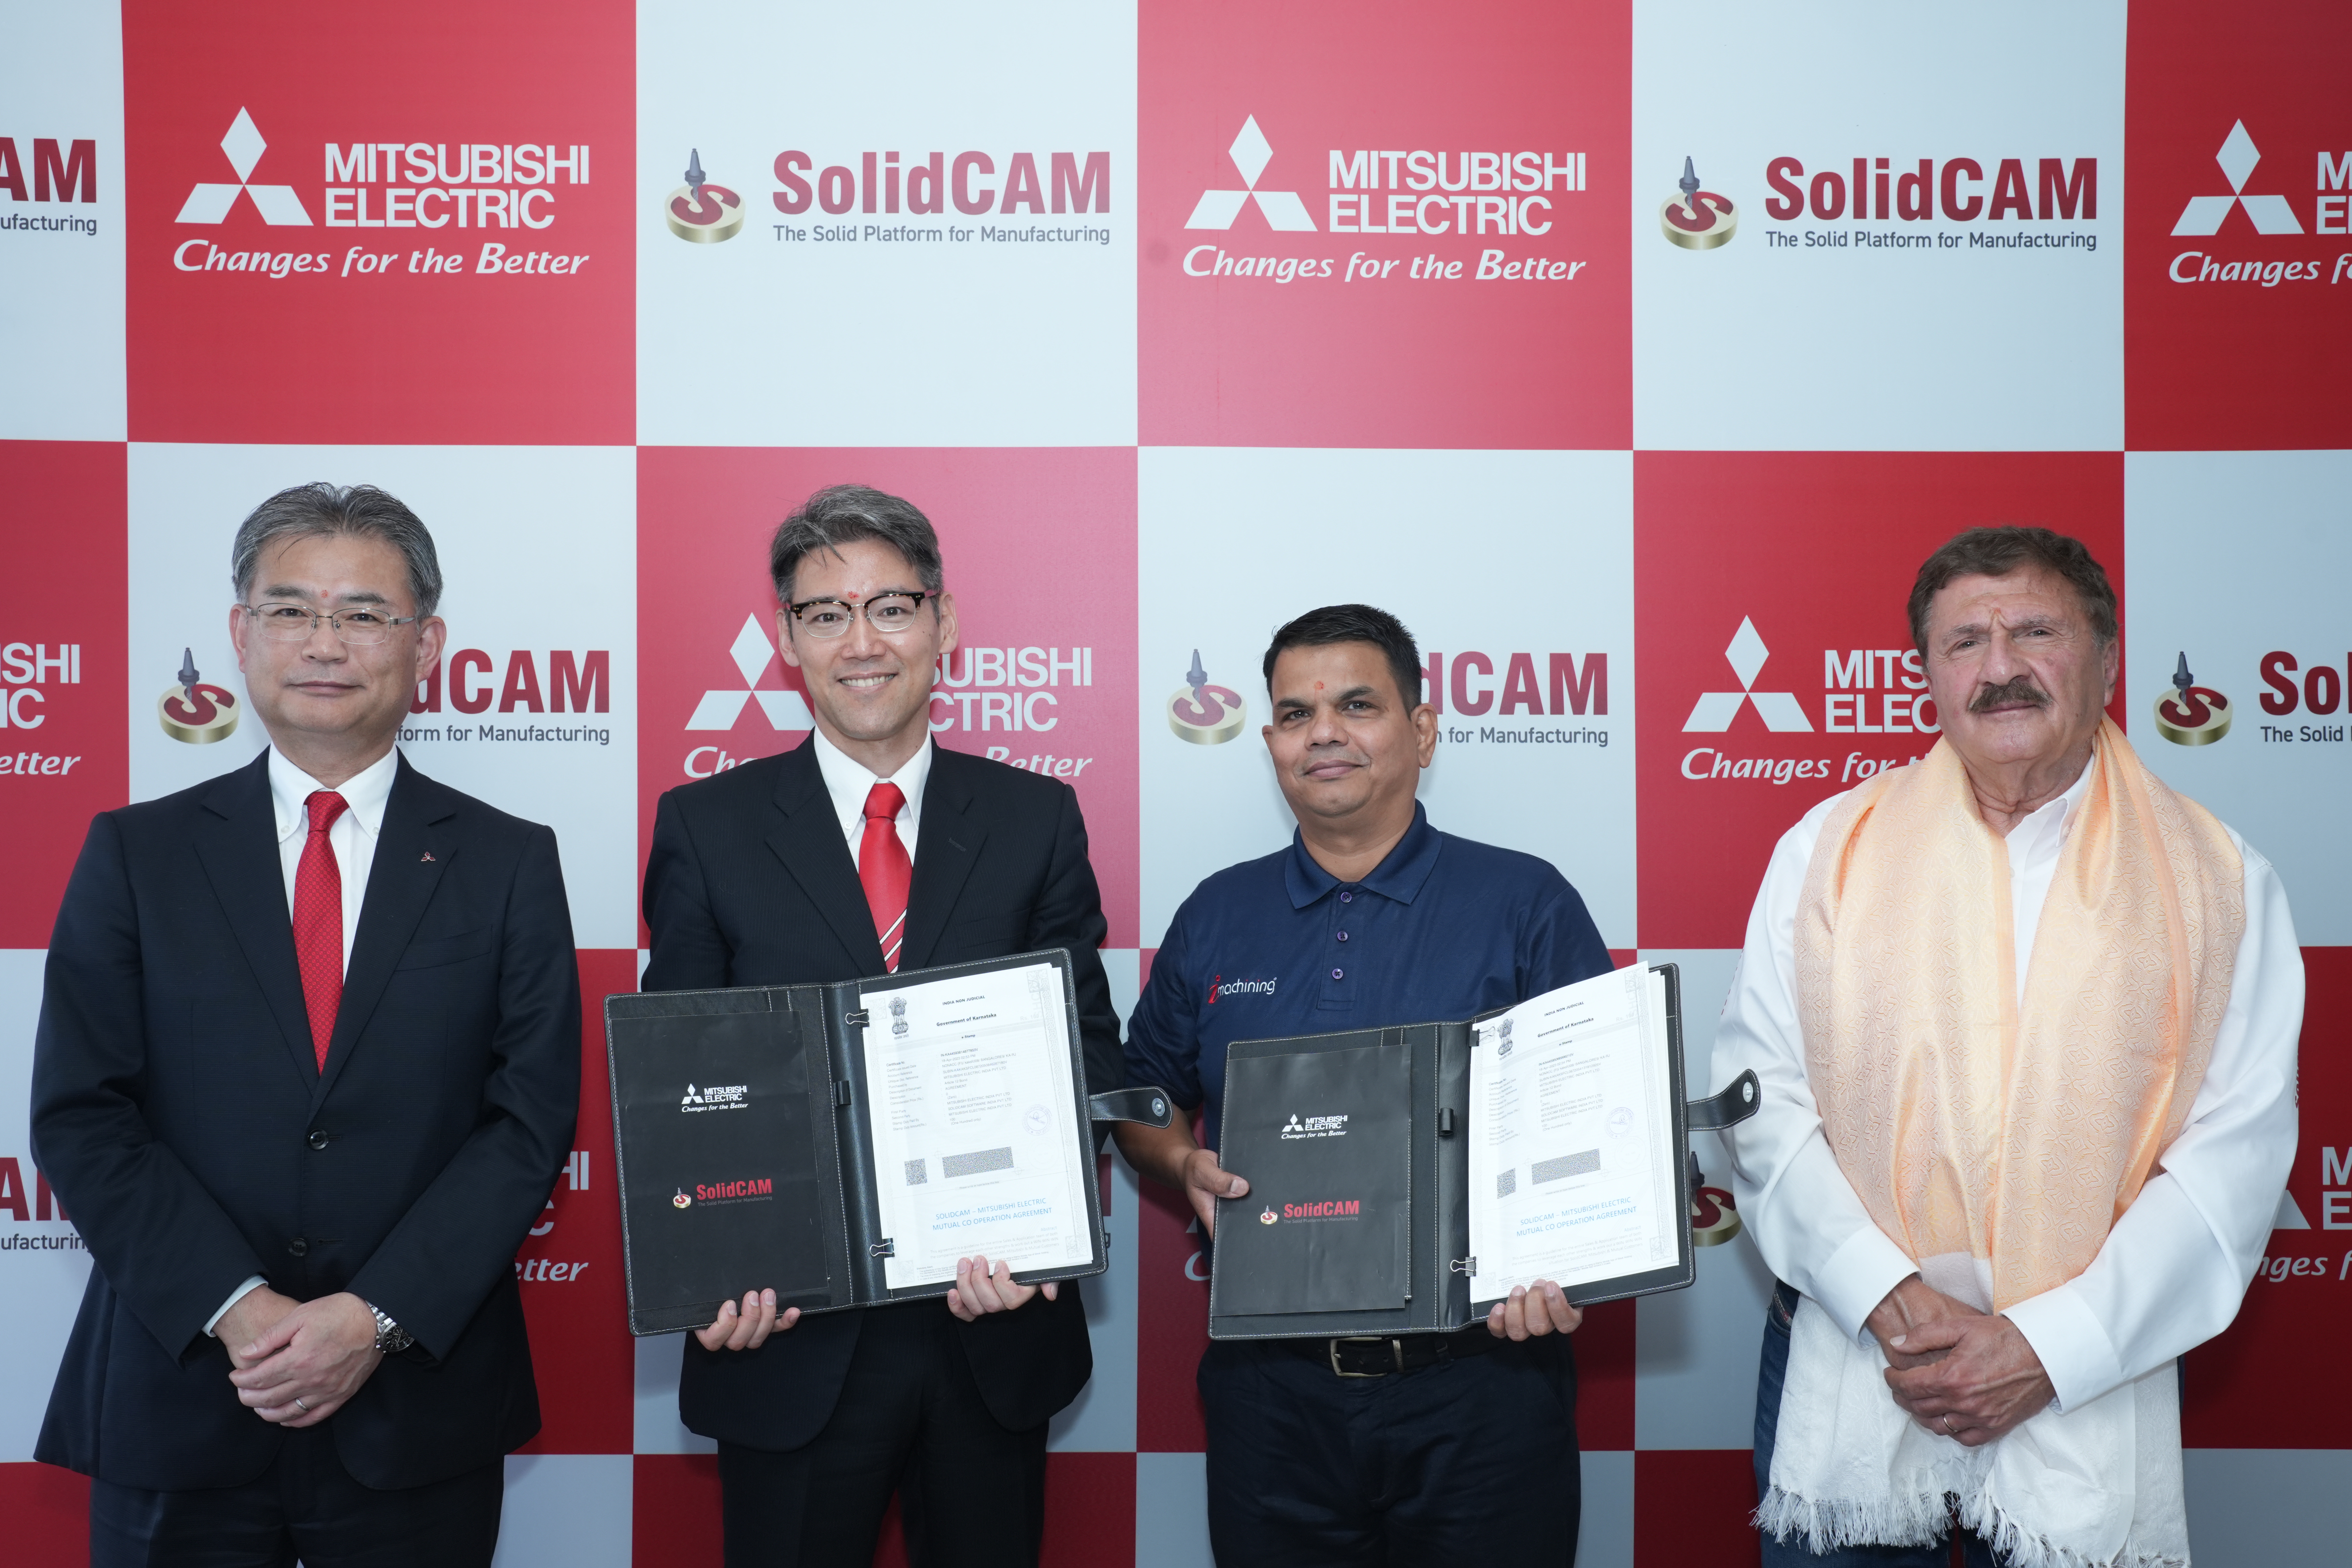 Mitsubishi Electric India CNC Announced Partnership with SolidCAM to Revolutionize the Manufacturing Industry